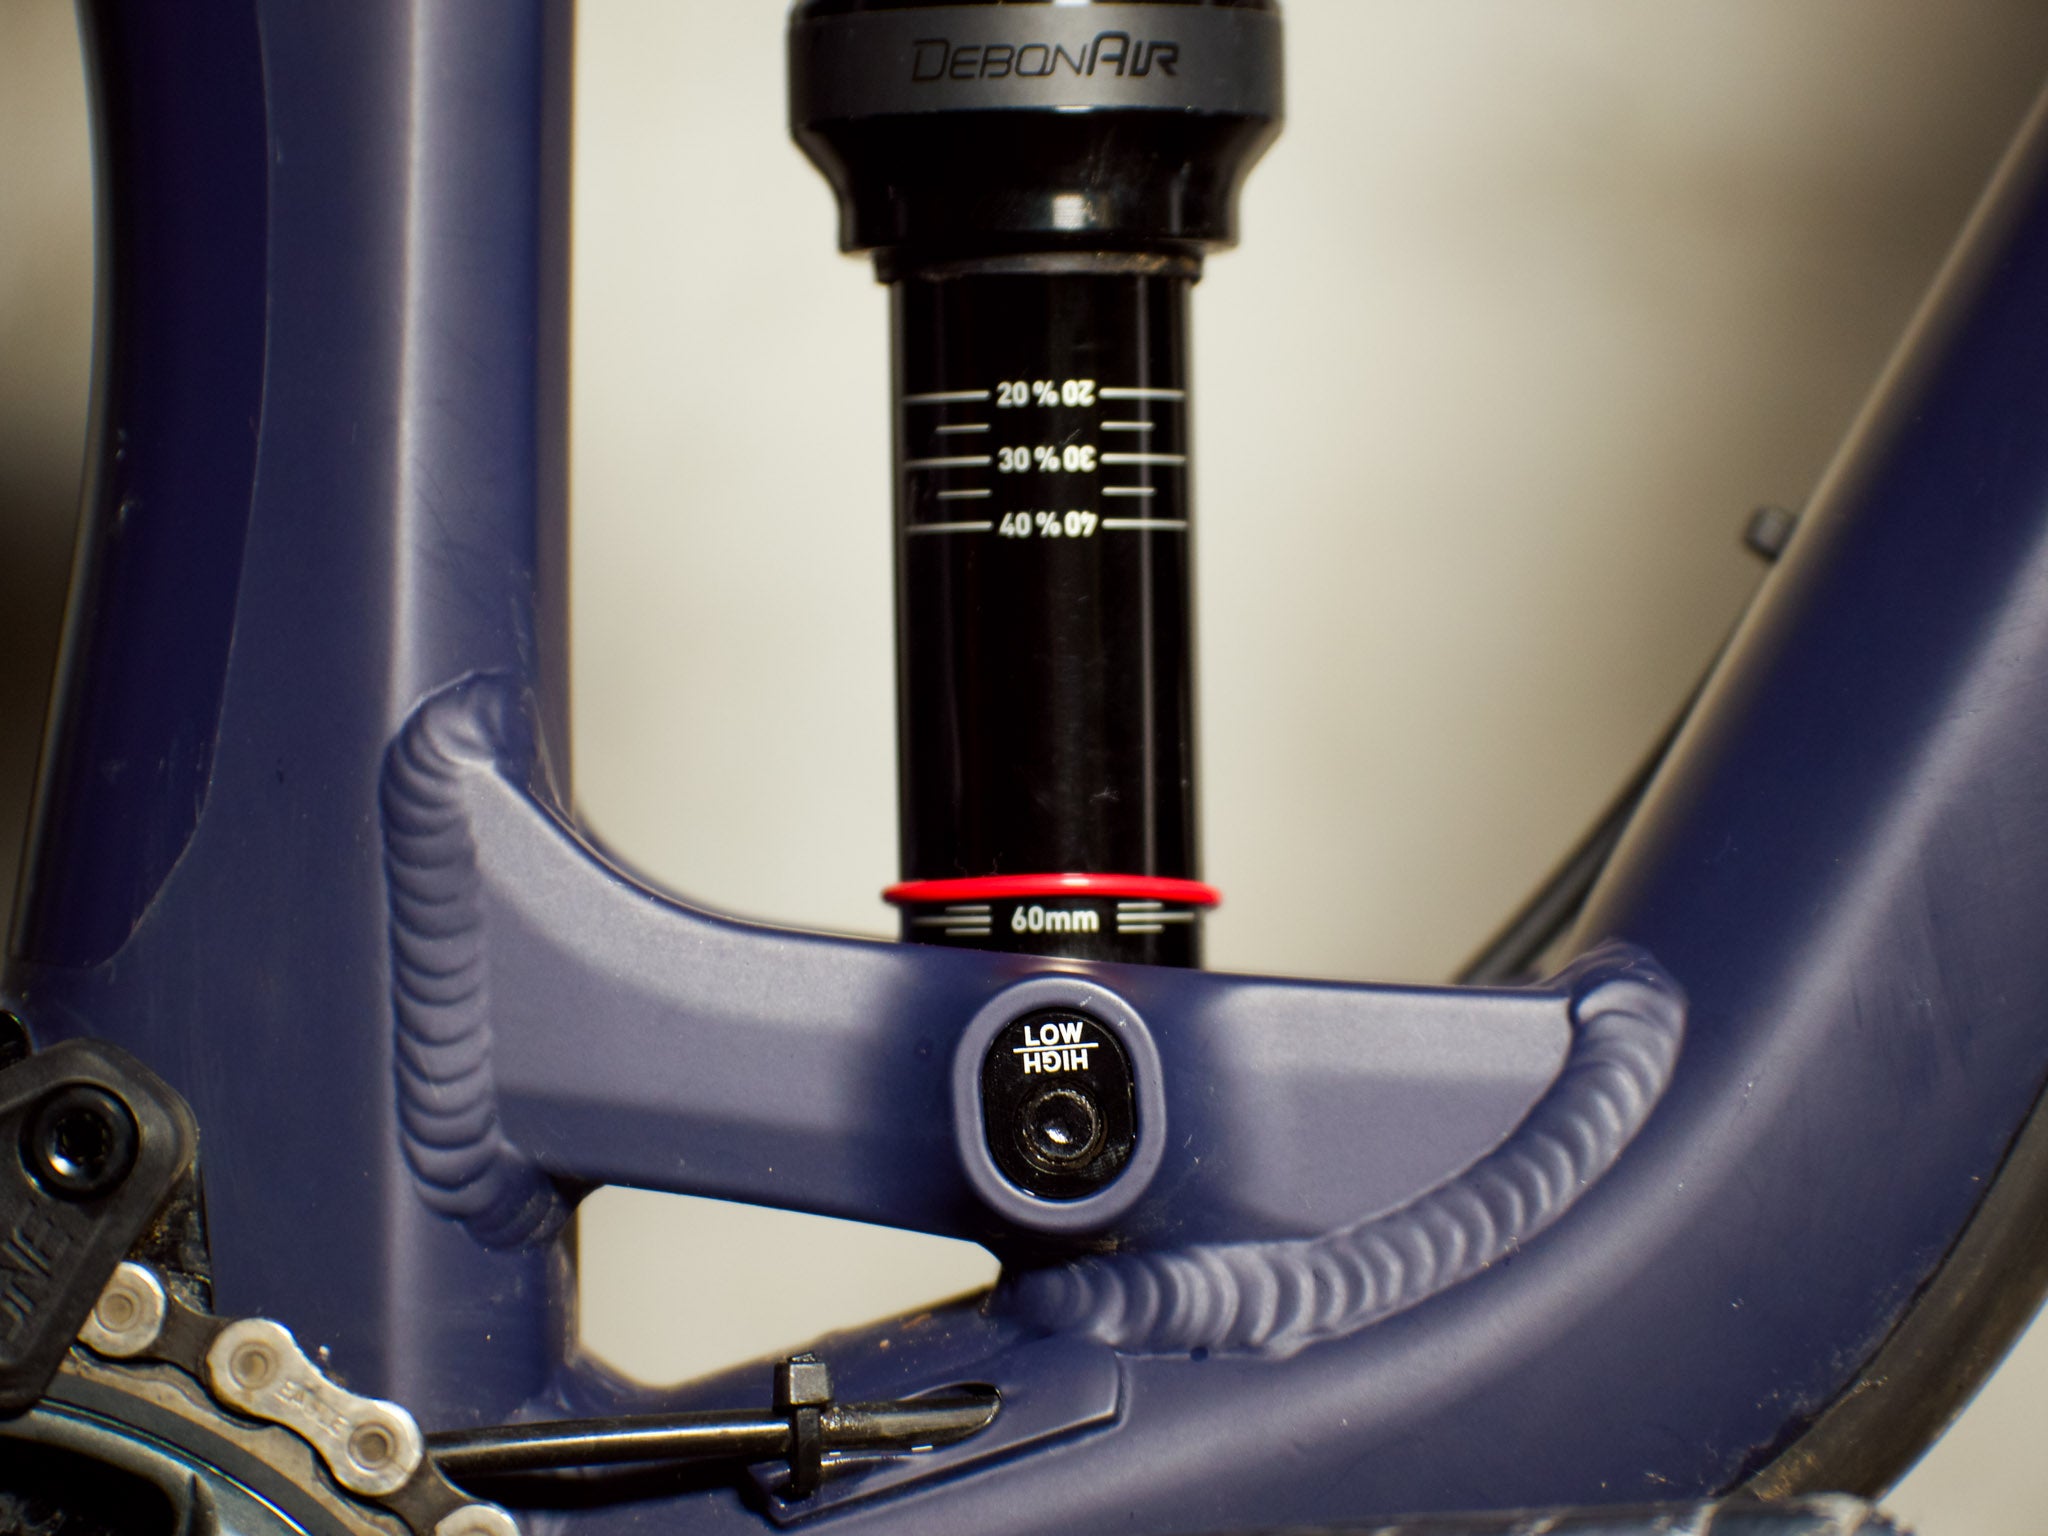 the flip-chip to low position is a straightforward process dropping headtube angle an aggressive